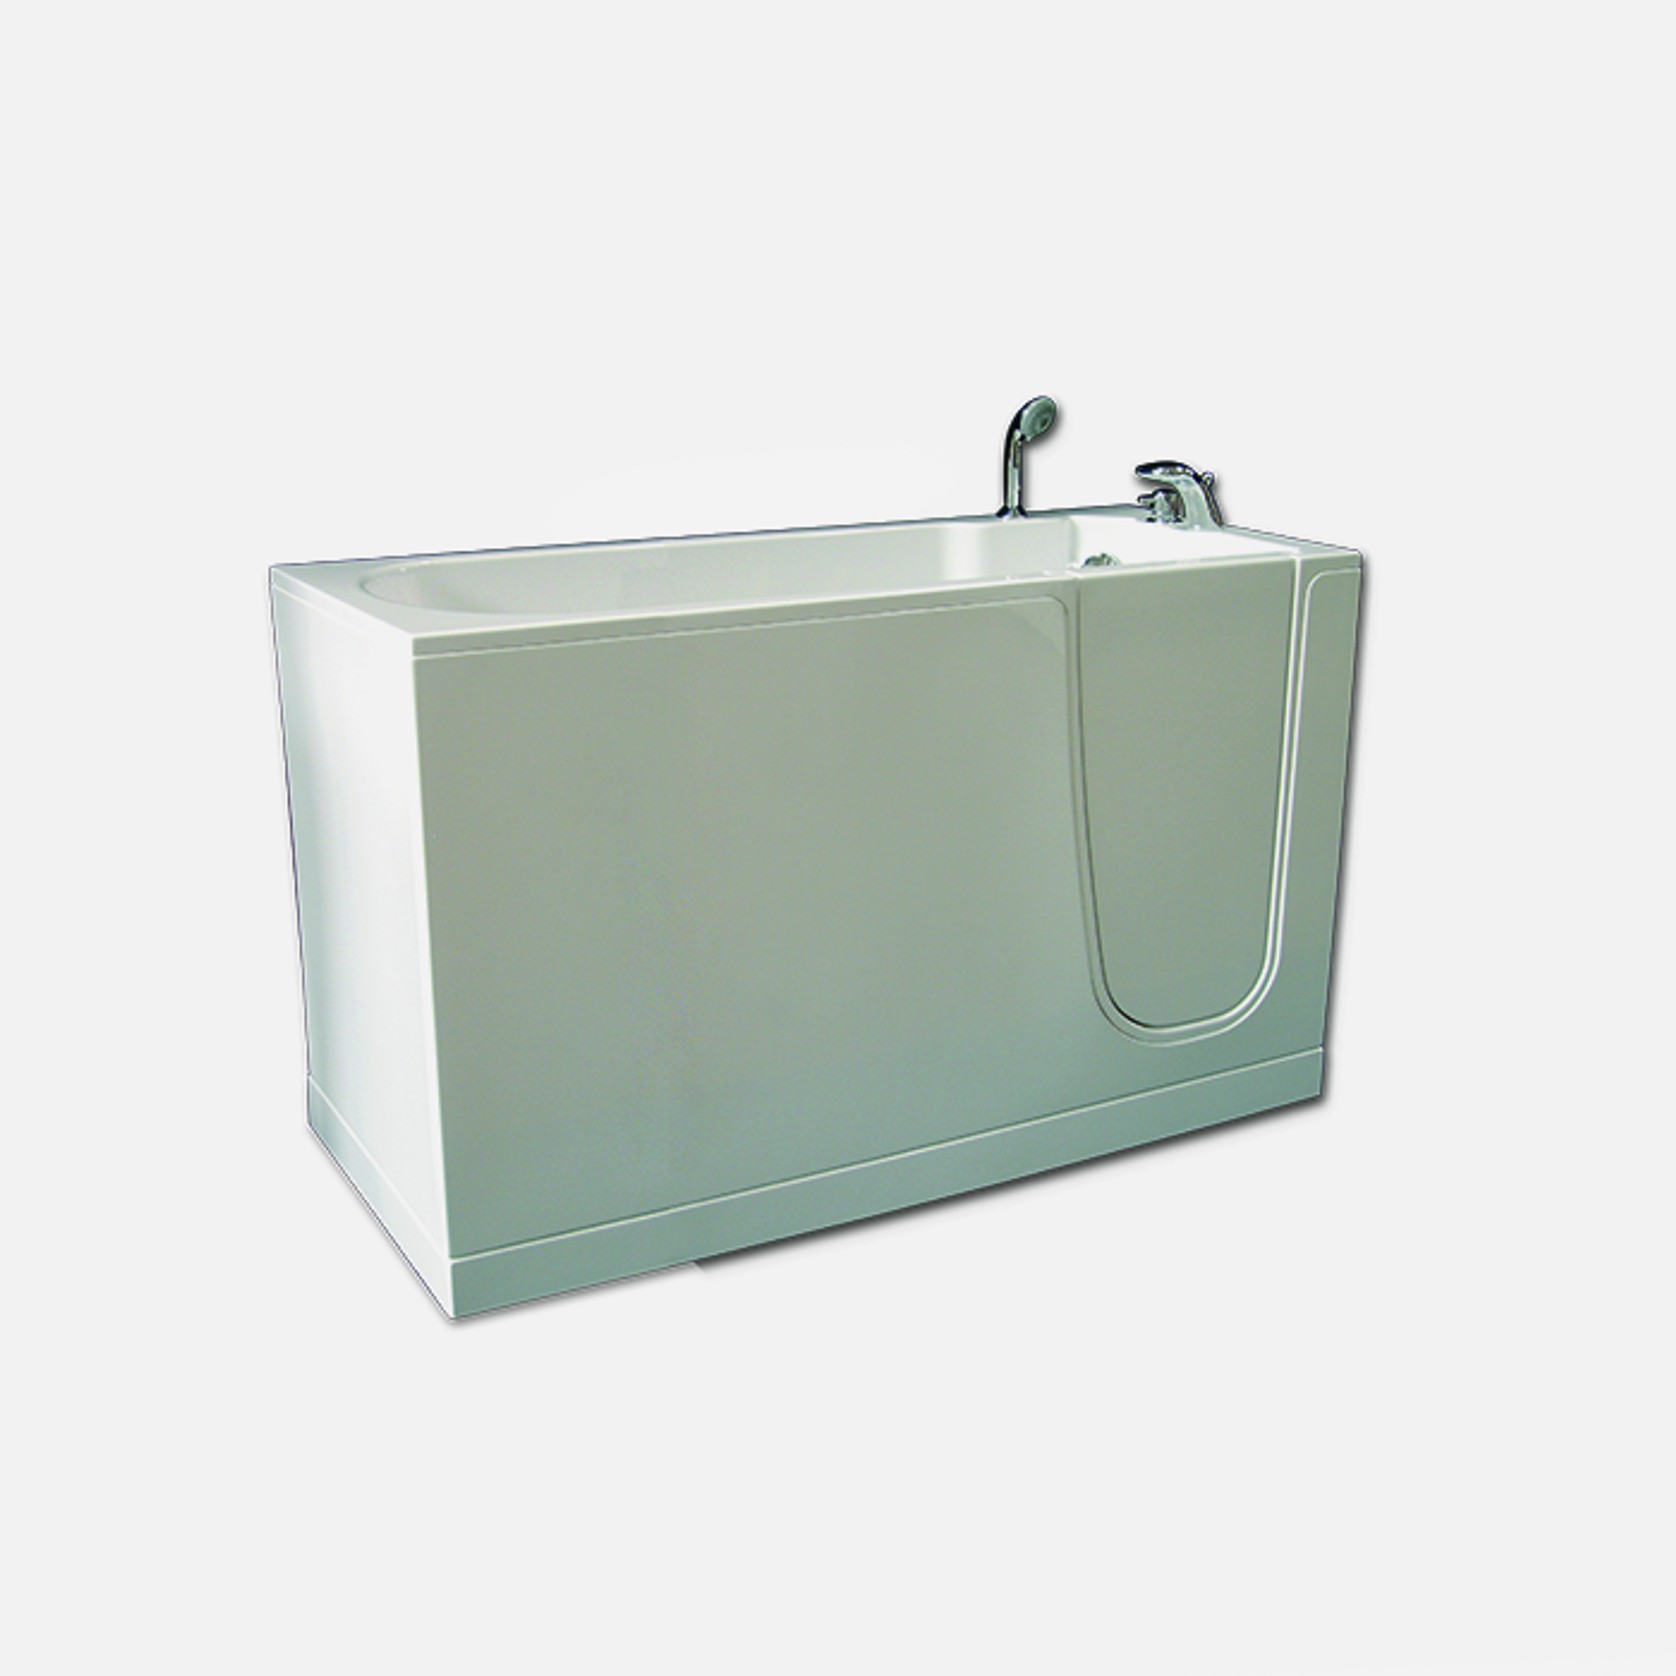 Oasi 140cm bathtub - door on the right by GOMAN gallery detail image